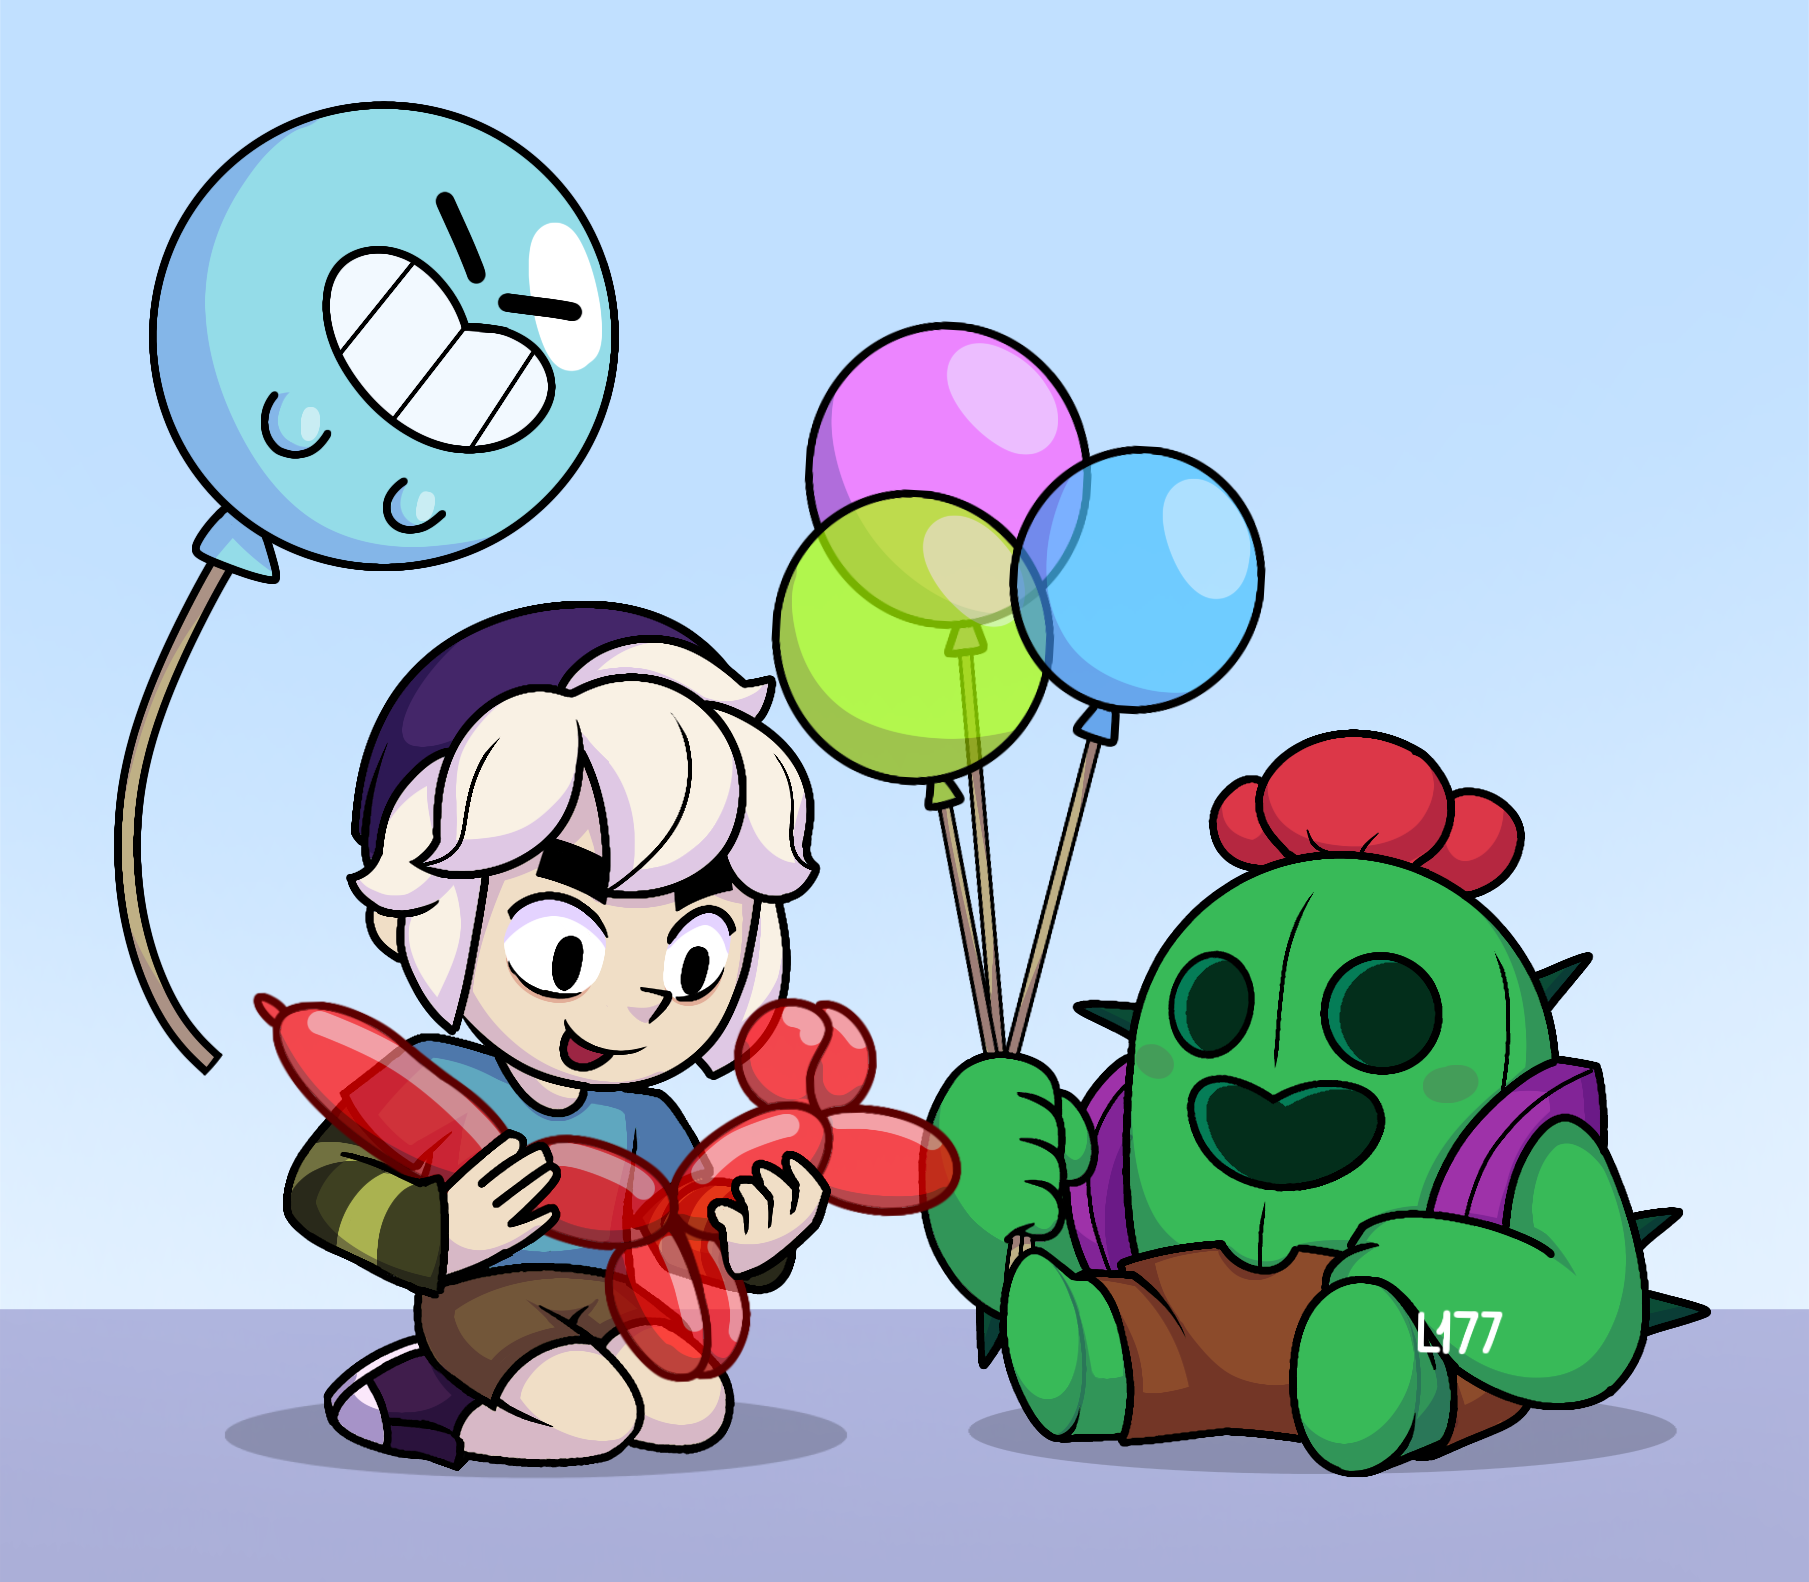 Gus and Spike playing with balloons  Brawl Stars by Lazuli177 on DeviantArt